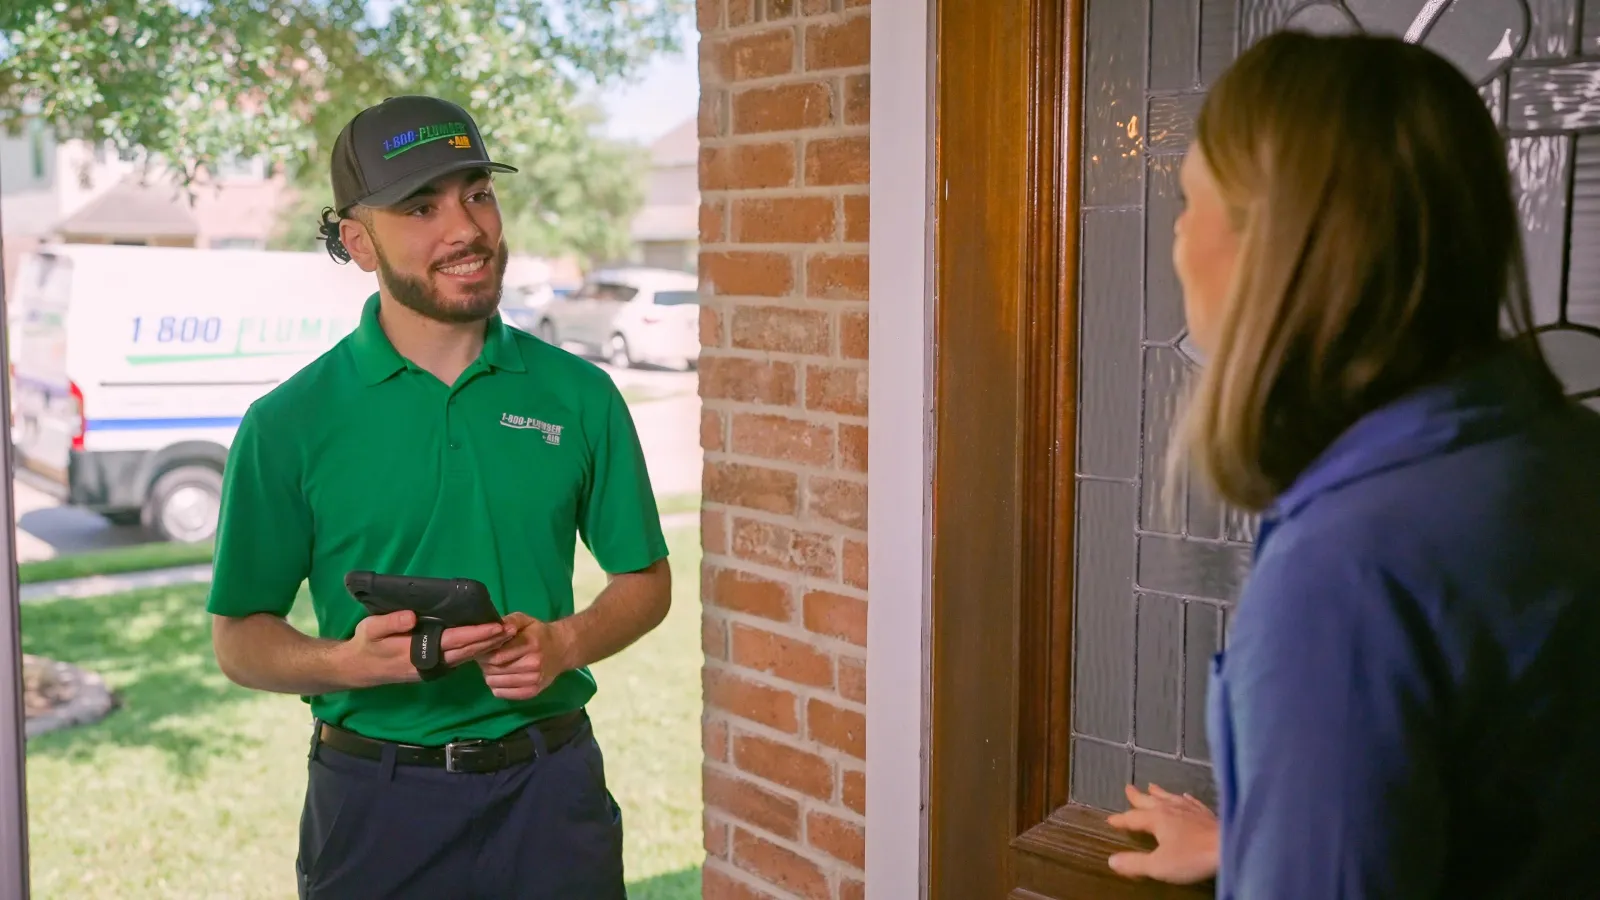 A 1-800-Plumber +Air of Clearwater plumber greets a homeowner